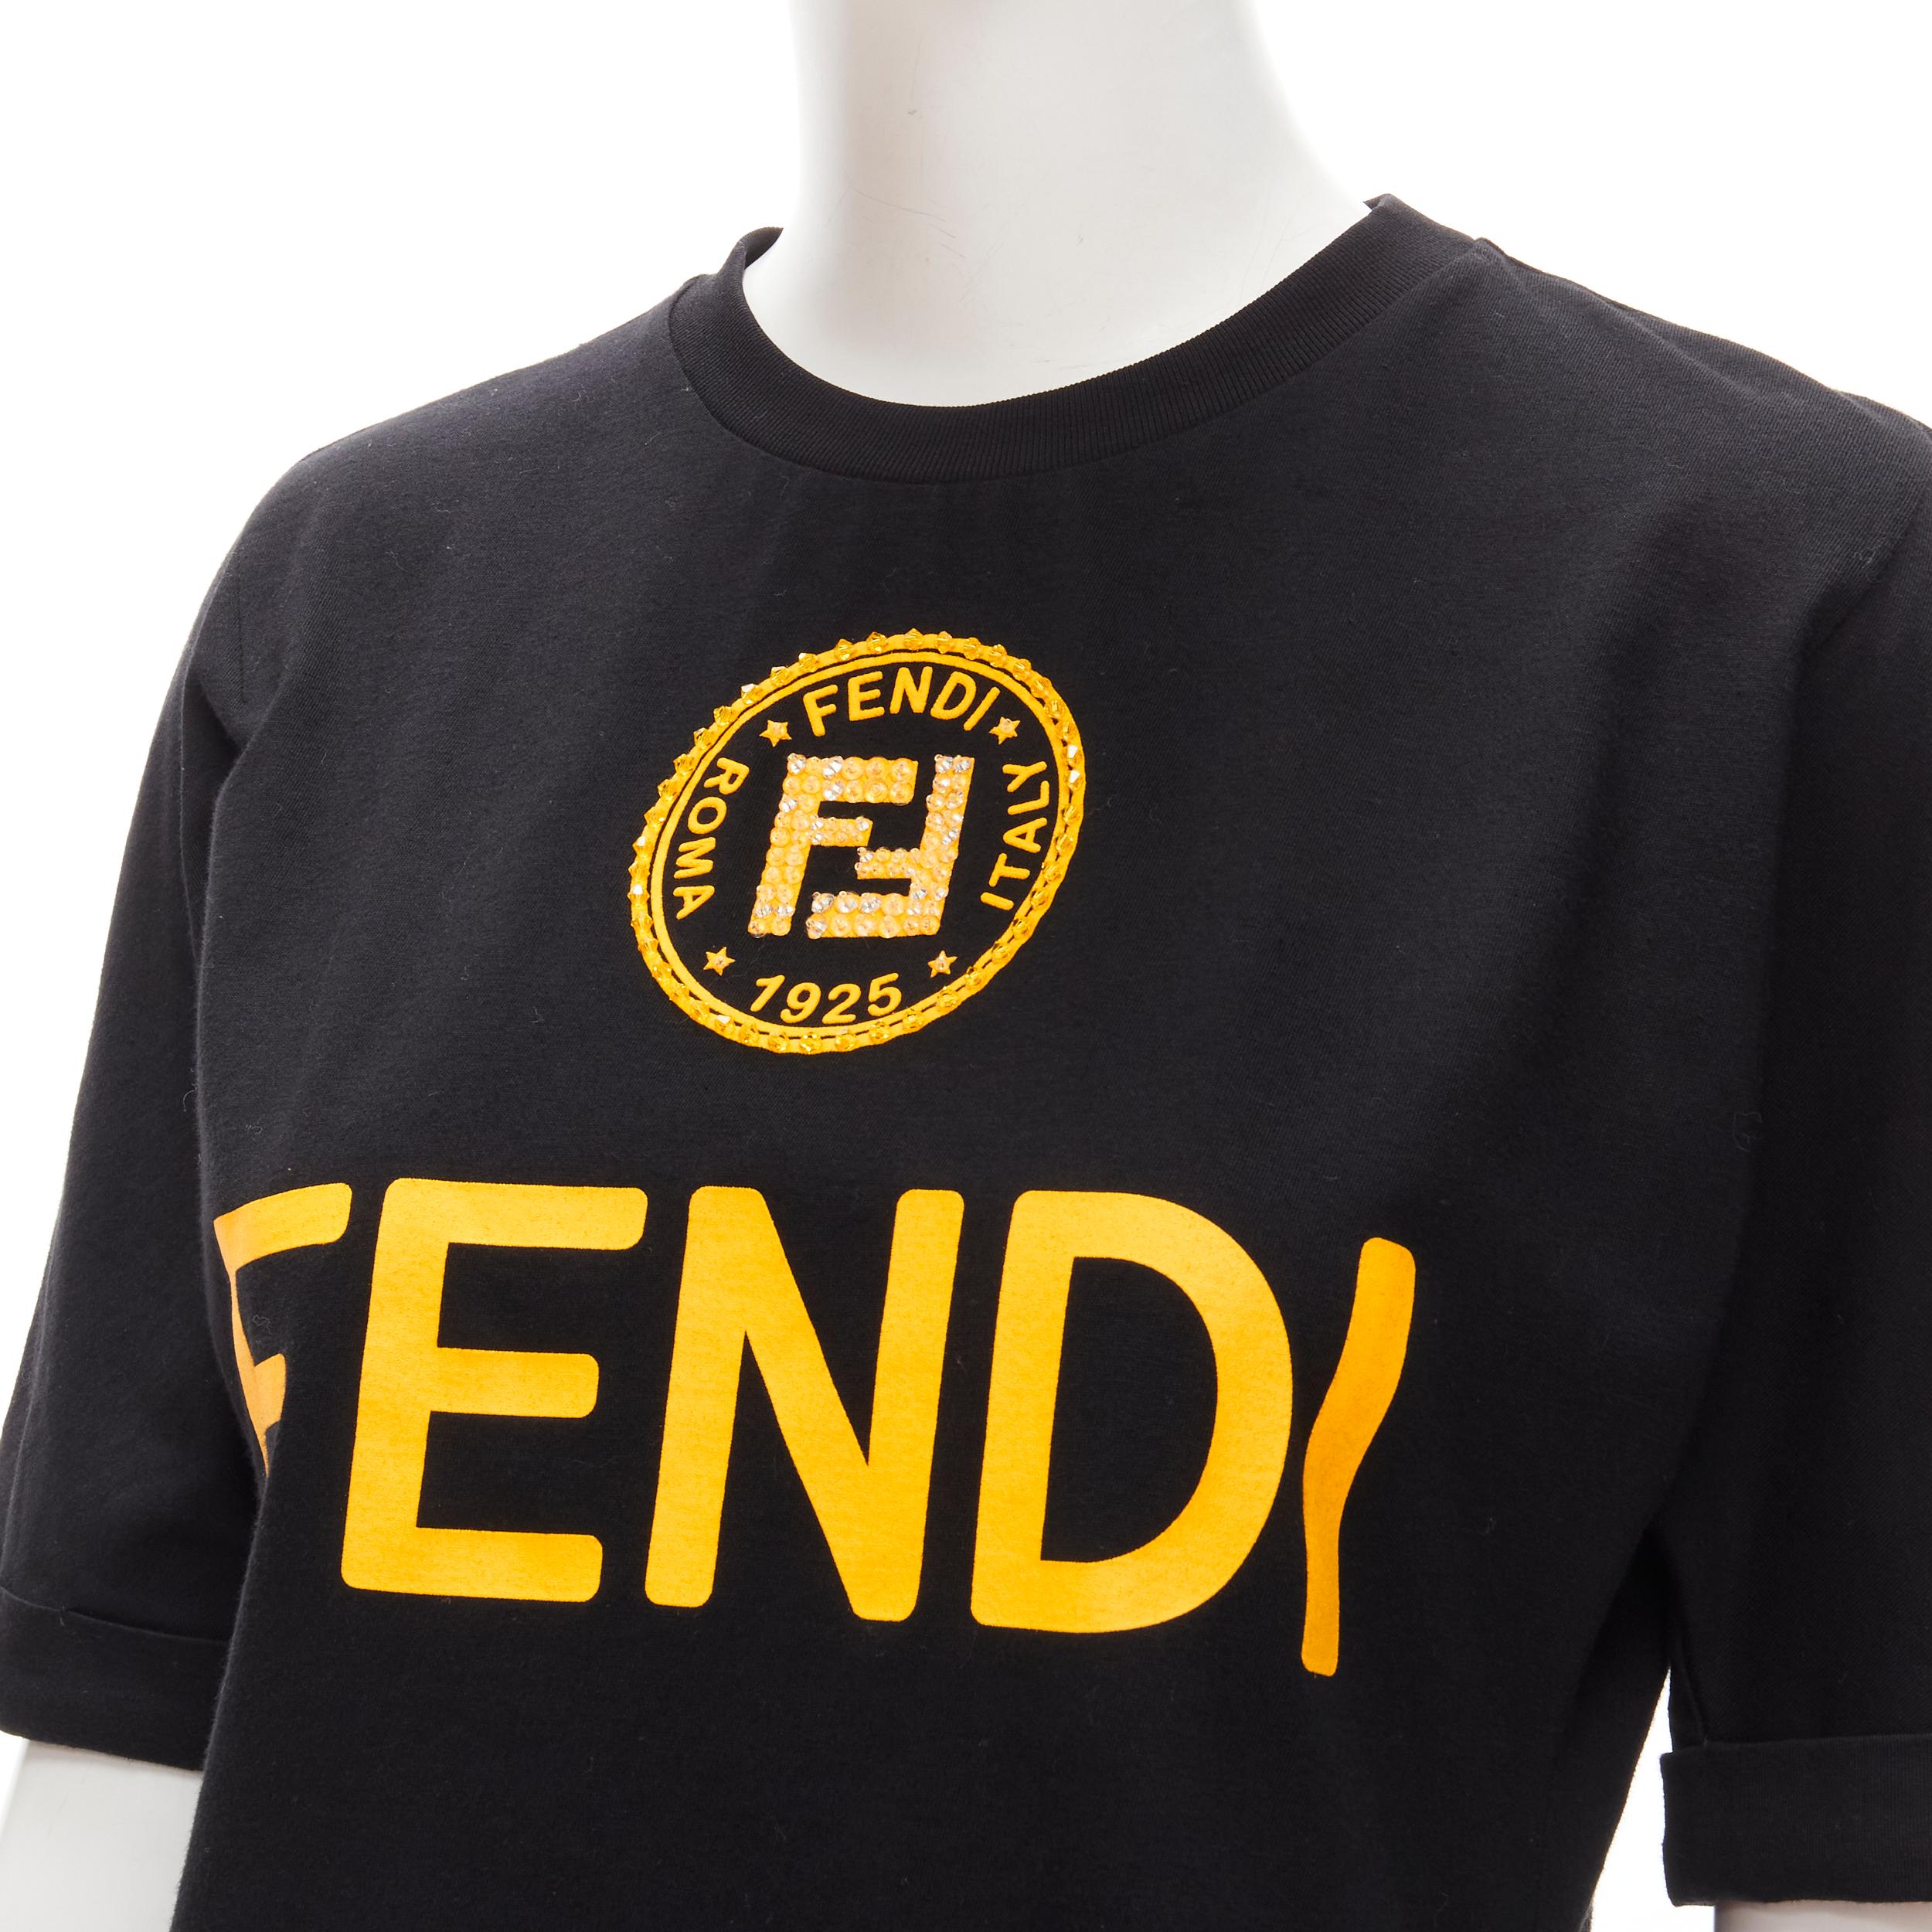 FENDI ROMA FF bead embellished logo black yellow cotton tshirt S
Brand: Fendi
Material: Feels like cotton
Color: Black
Pattern: Solid
Extra Detail: Bead embellished FF logo. Signature Fendi yellow print on black cotton. Cuffed sleeves. Side slit.